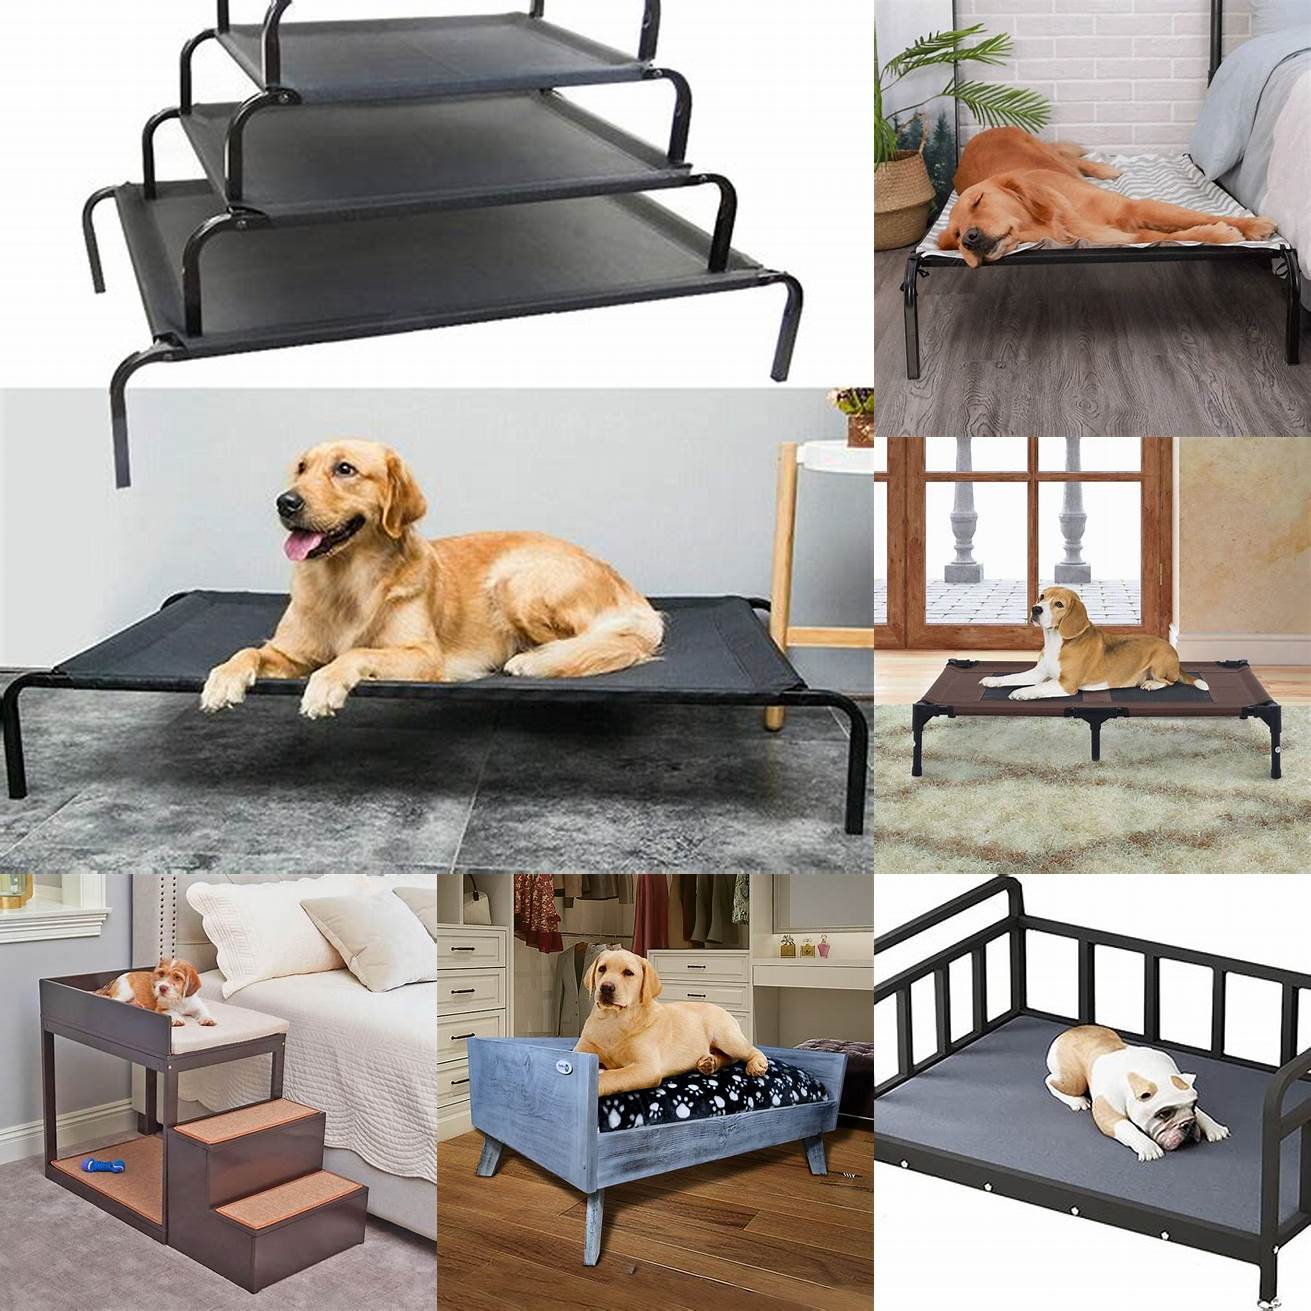 This elevated bed keeps dogs cool and comfortable even in warm weather